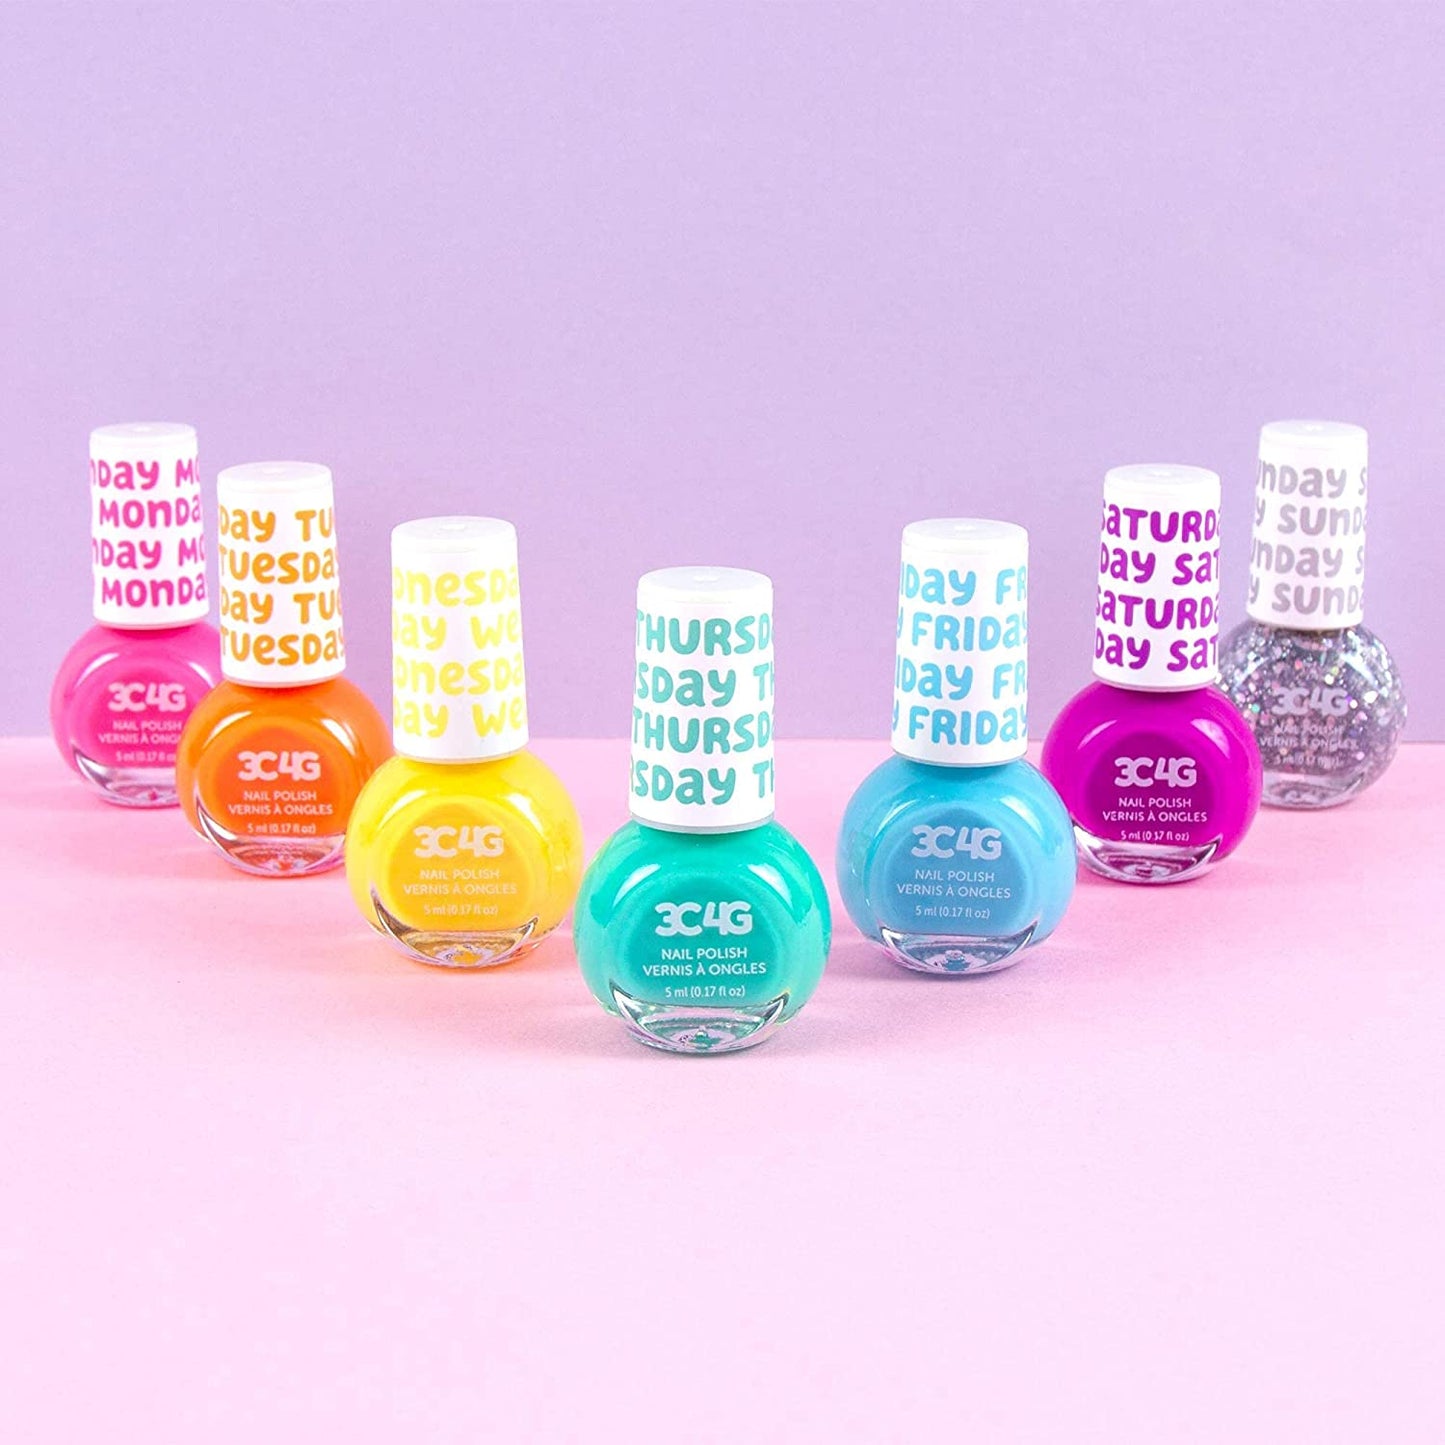 Three Cheers for Girls - Rainbow Bright Nail Polish Days of the Week - Nail Polish Set for Girls & Teens - Includes 7 Colors - Non-Toxic